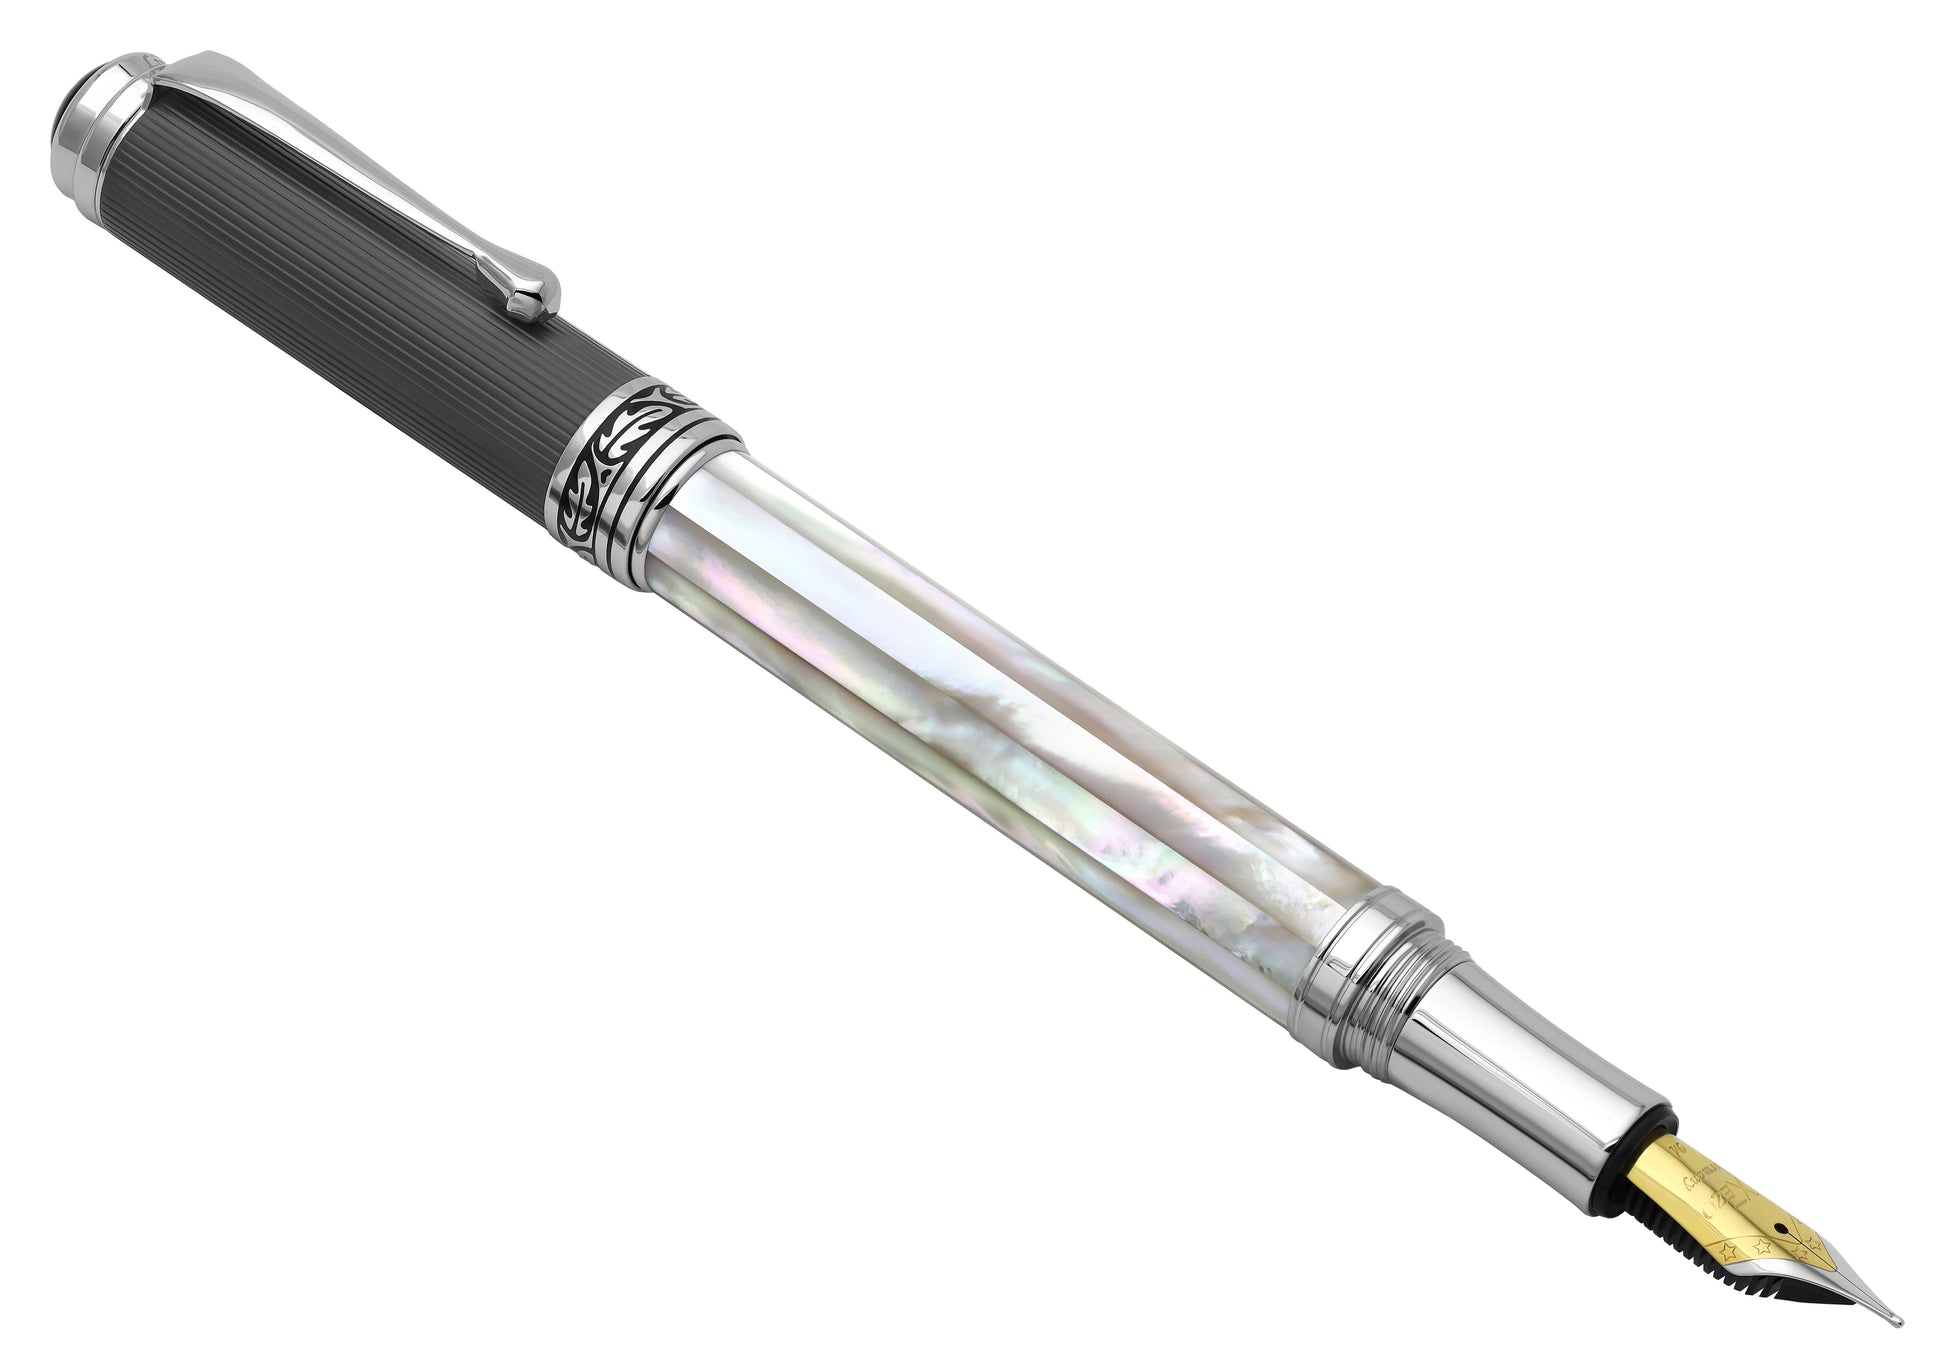 Second angled 3D view of the front of the Maestro White MOP PVD B ballpoint pen